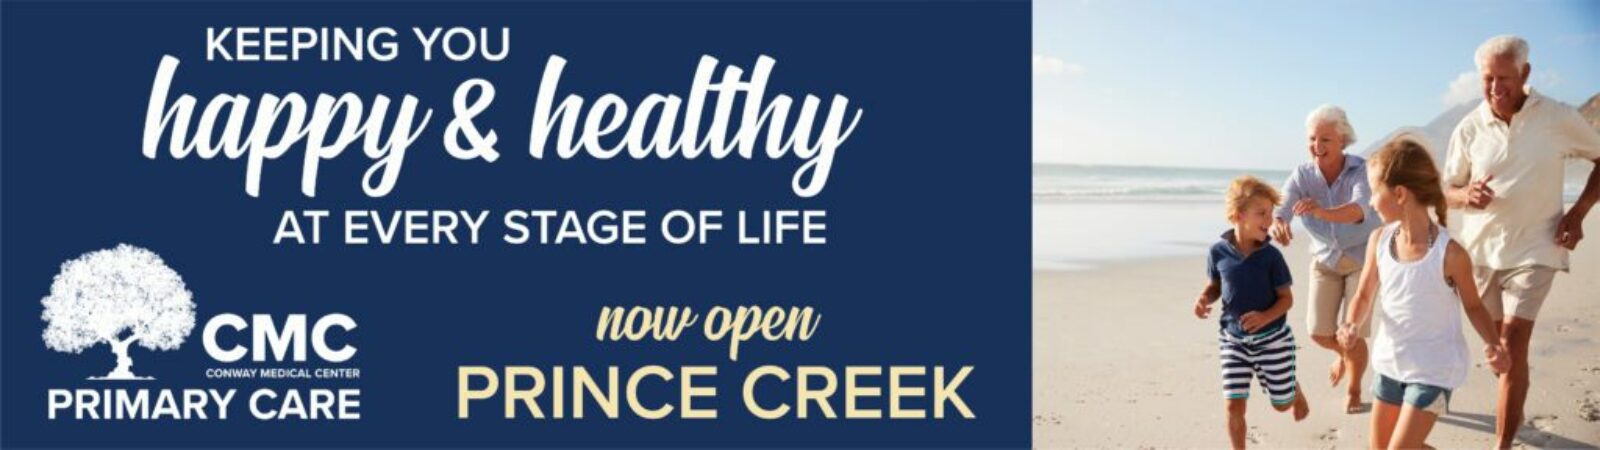 Primary Care Prince Creek Website Banner